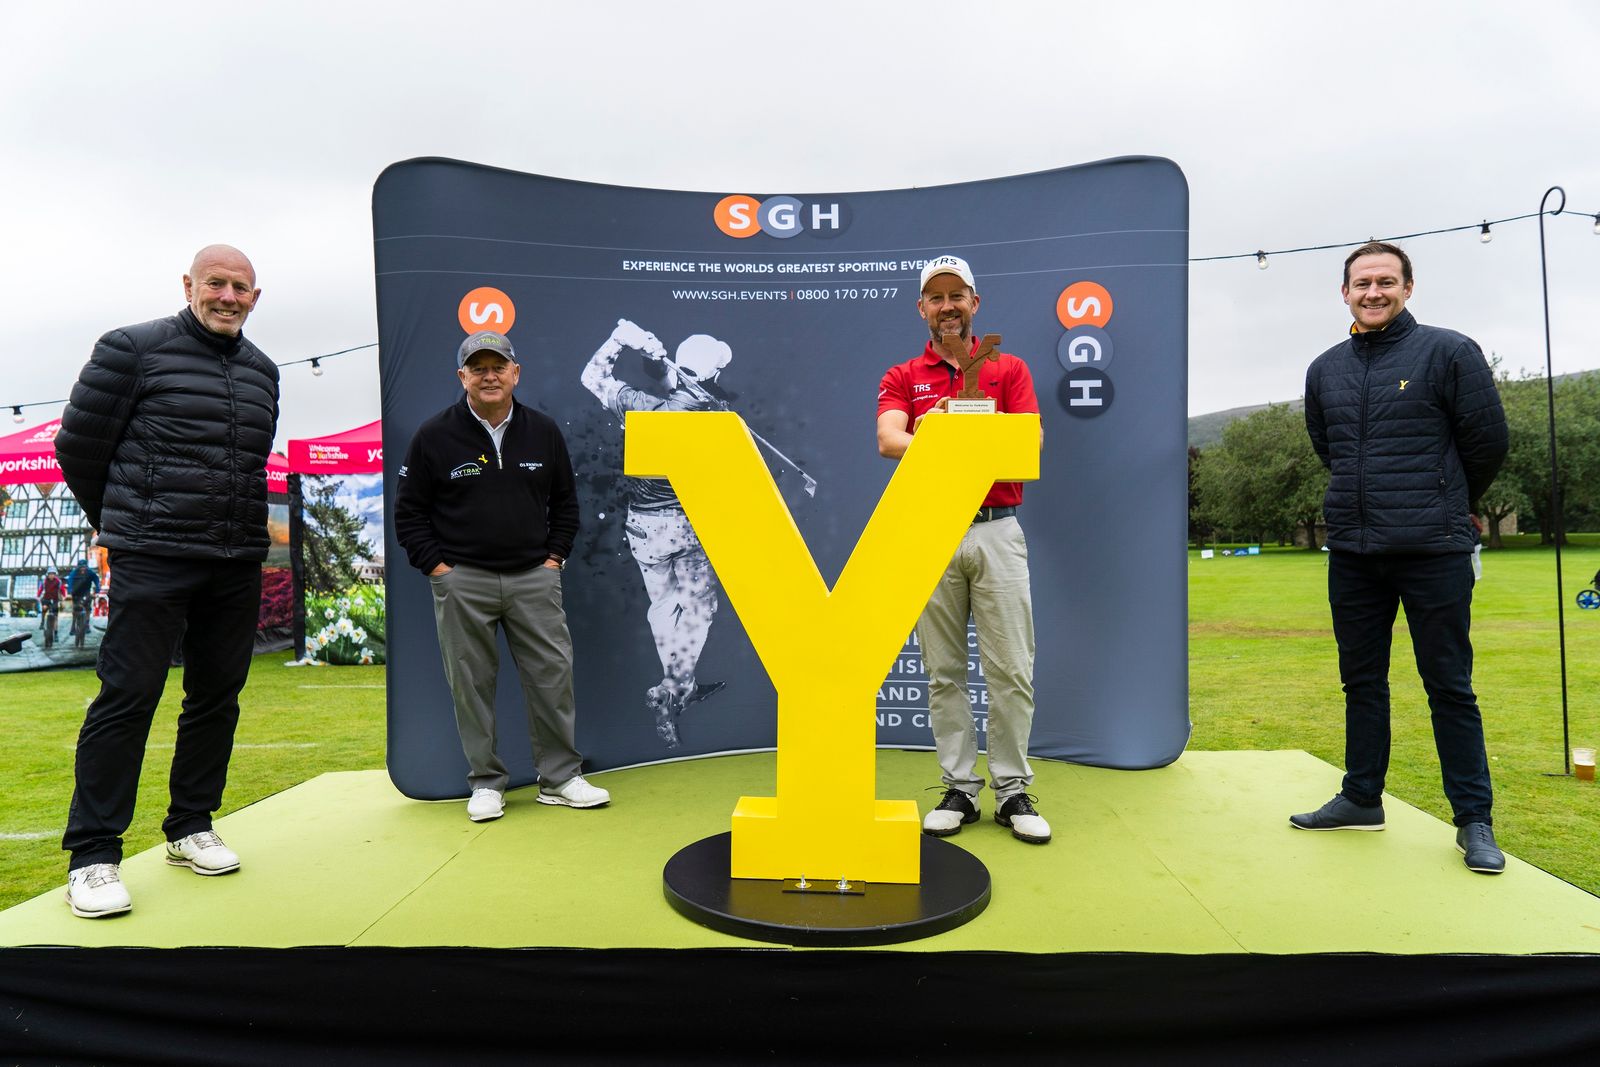 Ian Woosnam senior classic hailed a hit driving Yorkshire tourism